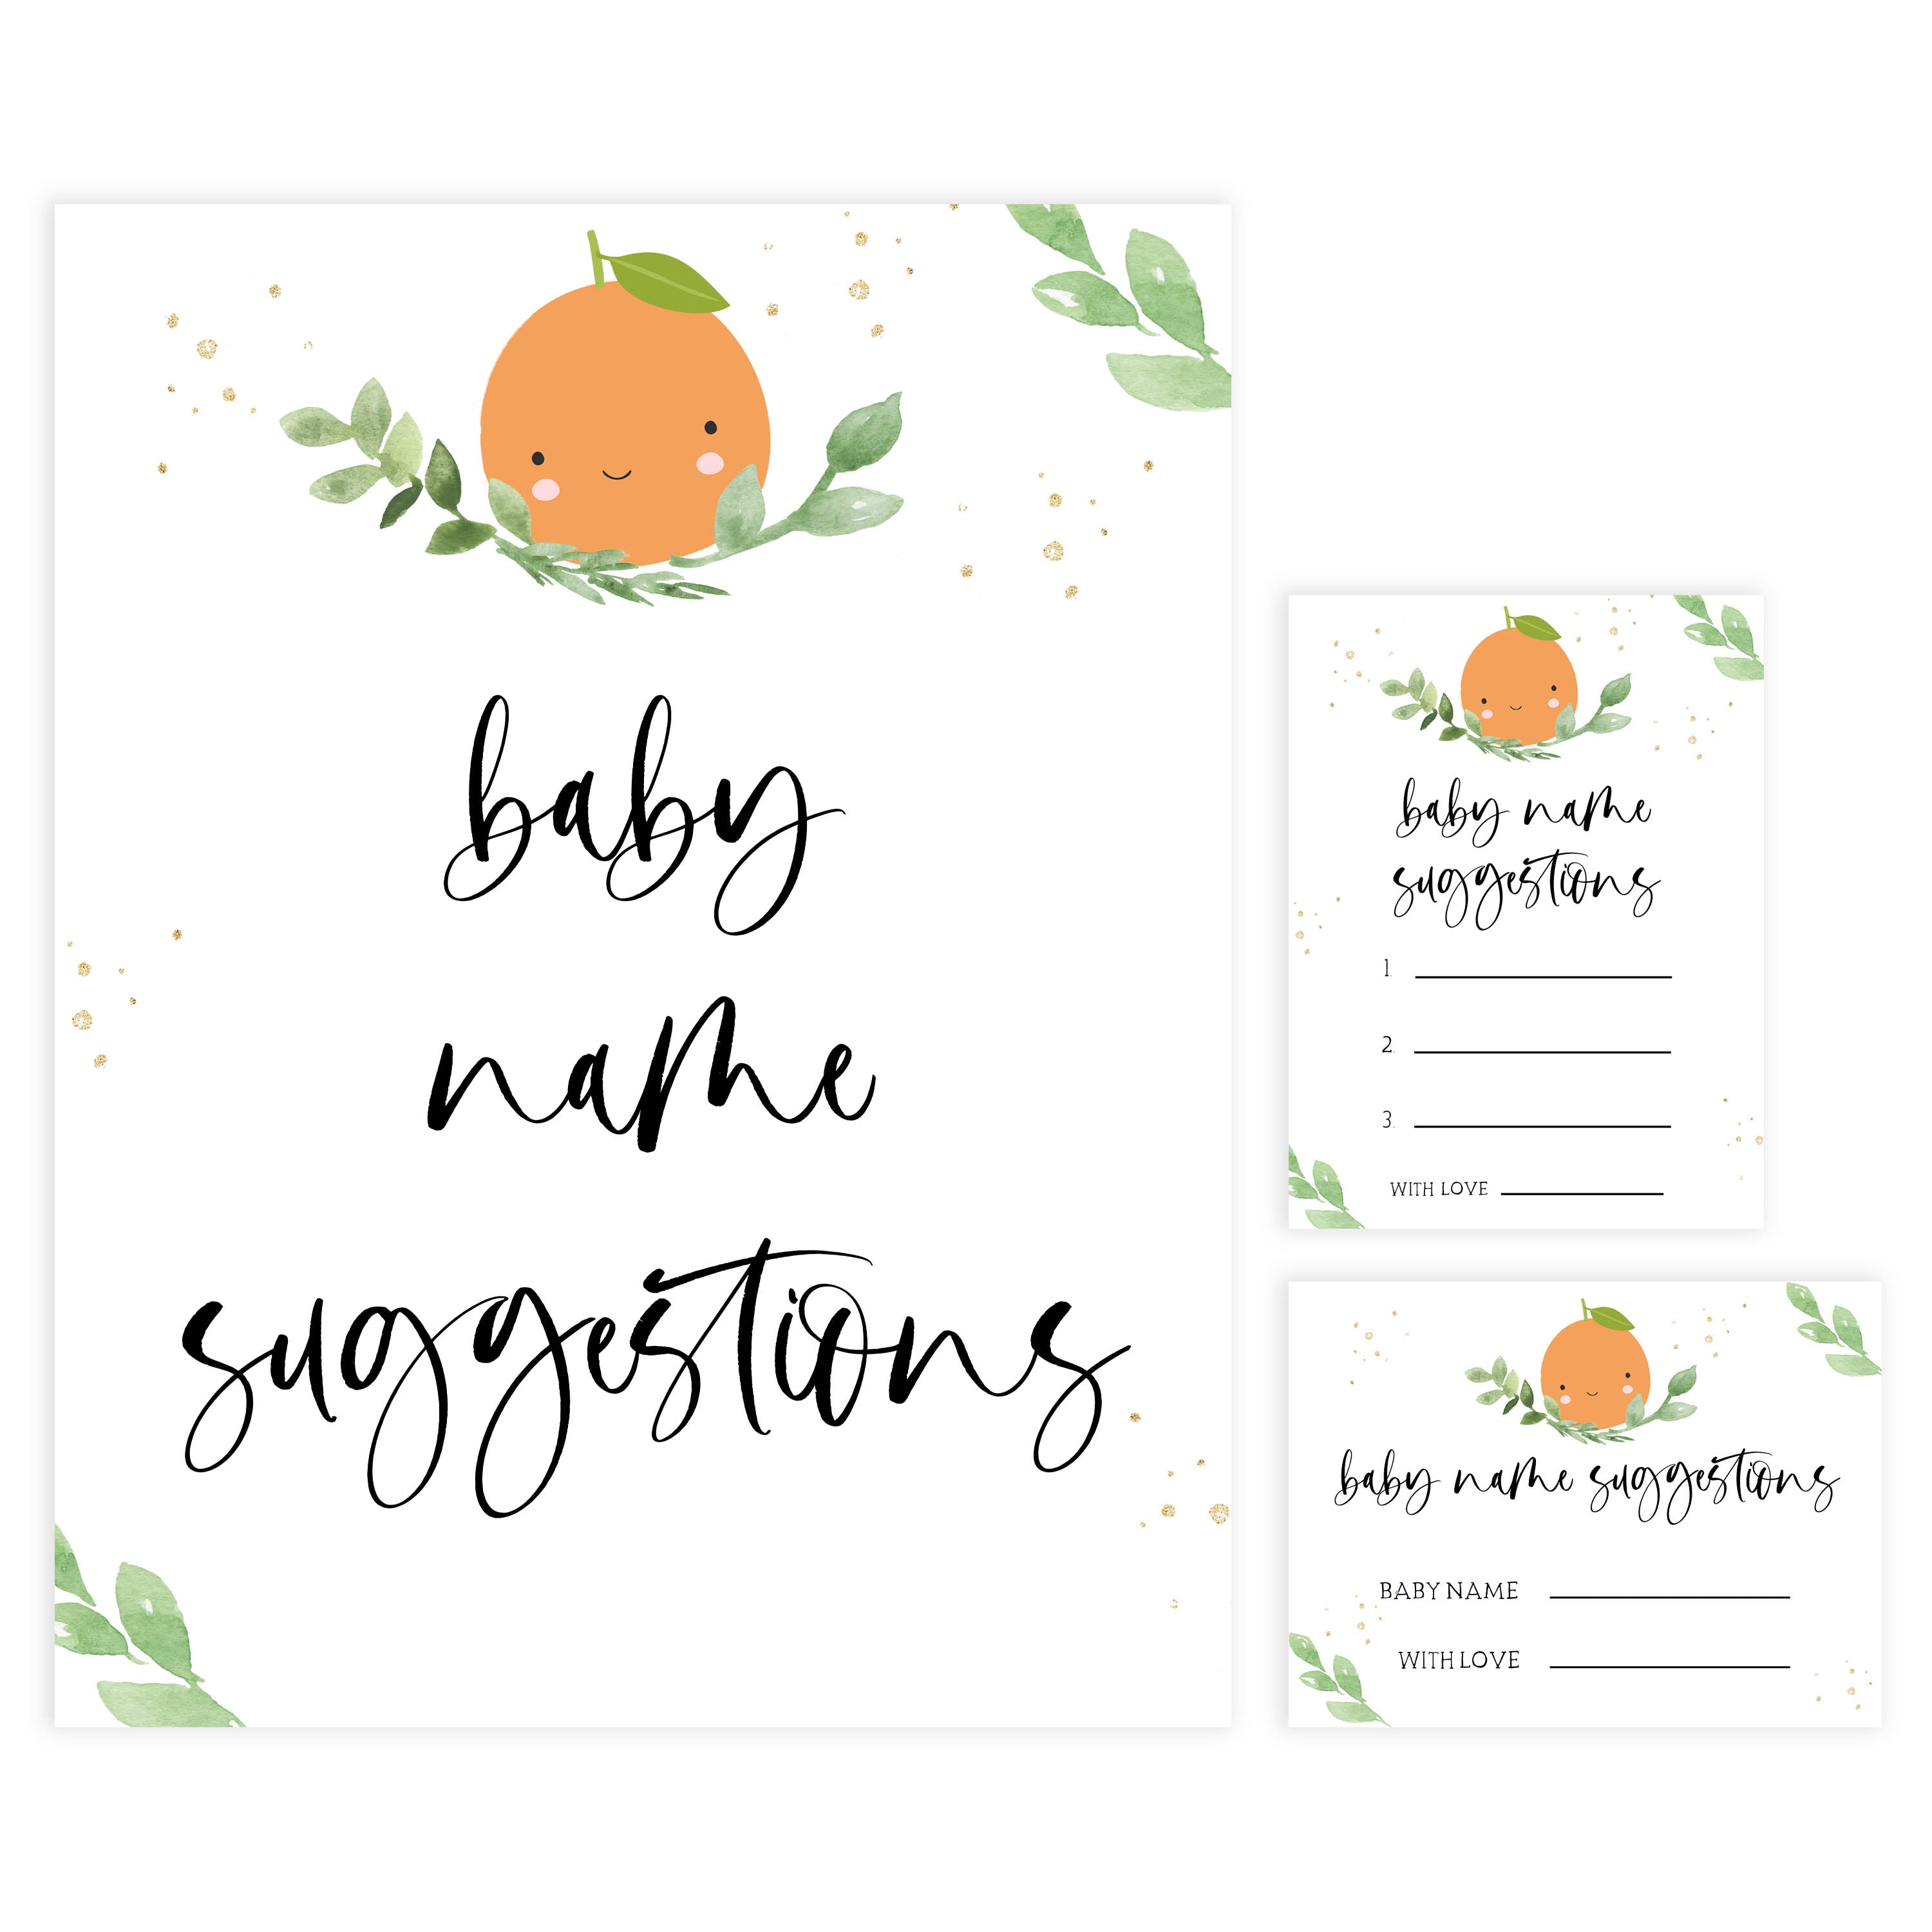 baby name suggestions, Printable baby shower games, little cutie baby games, baby shower games, fun baby shower ideas, top baby shower ideas, little cutie baby shower, baby shower games, fun little cutie baby shower ideas